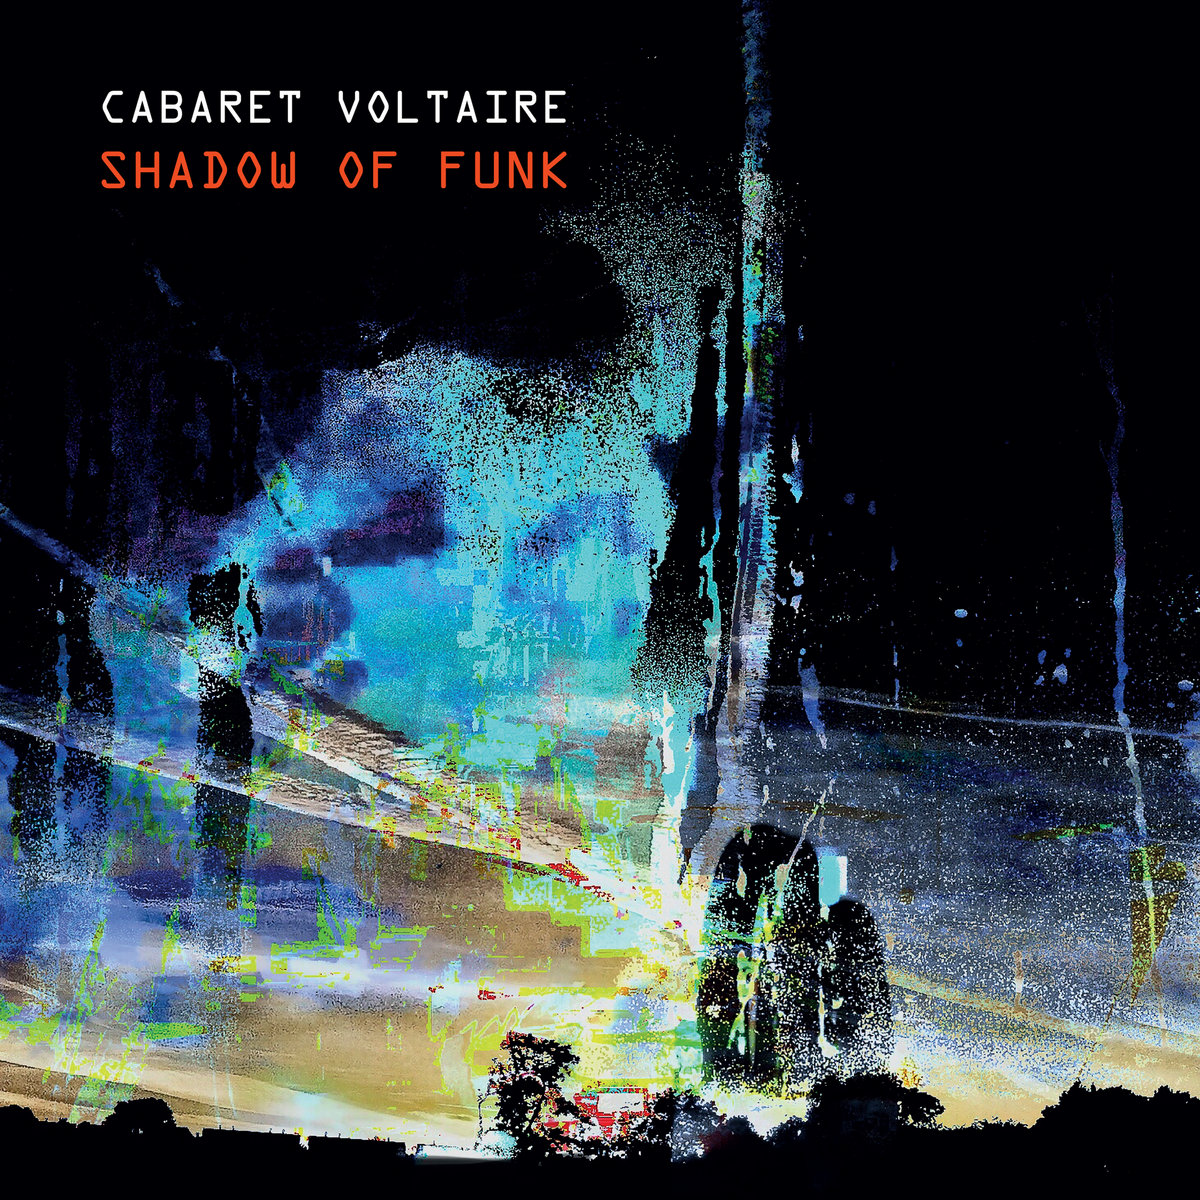 Cabaret Voltaire Shadow of Funk